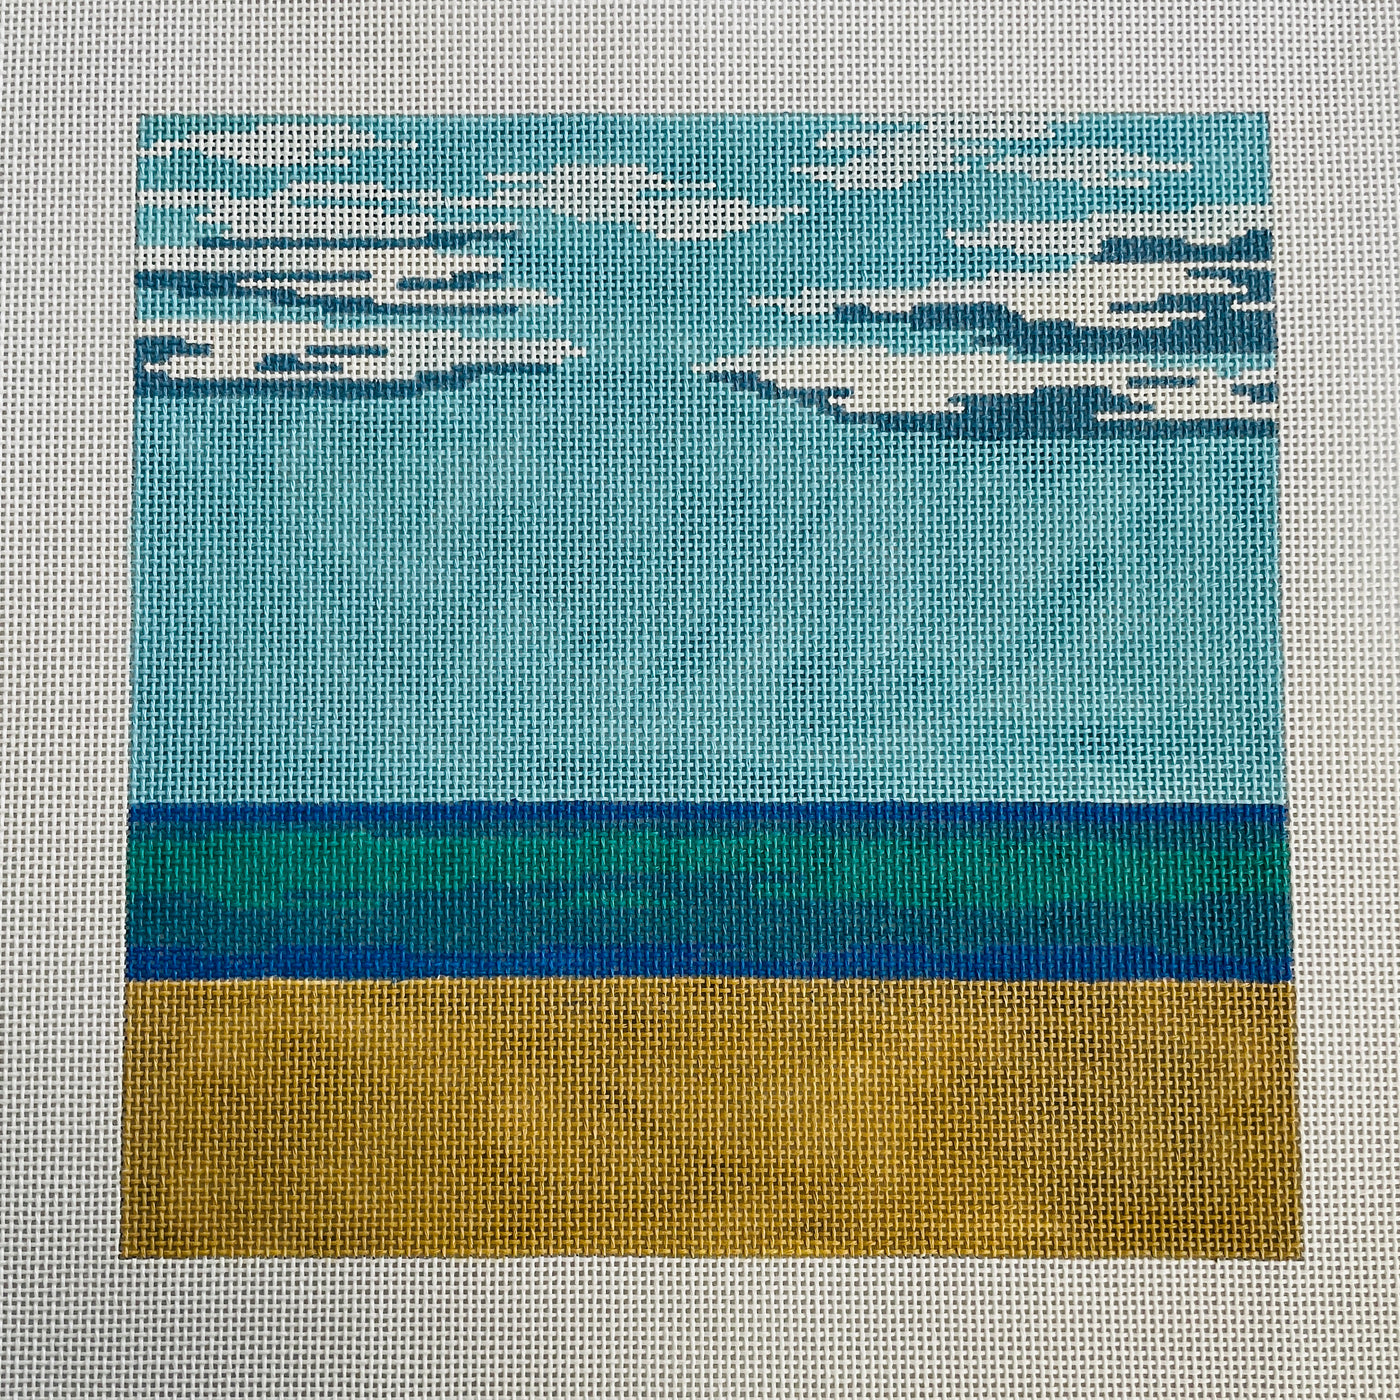 A Perfect Day Needlepoint Canvas